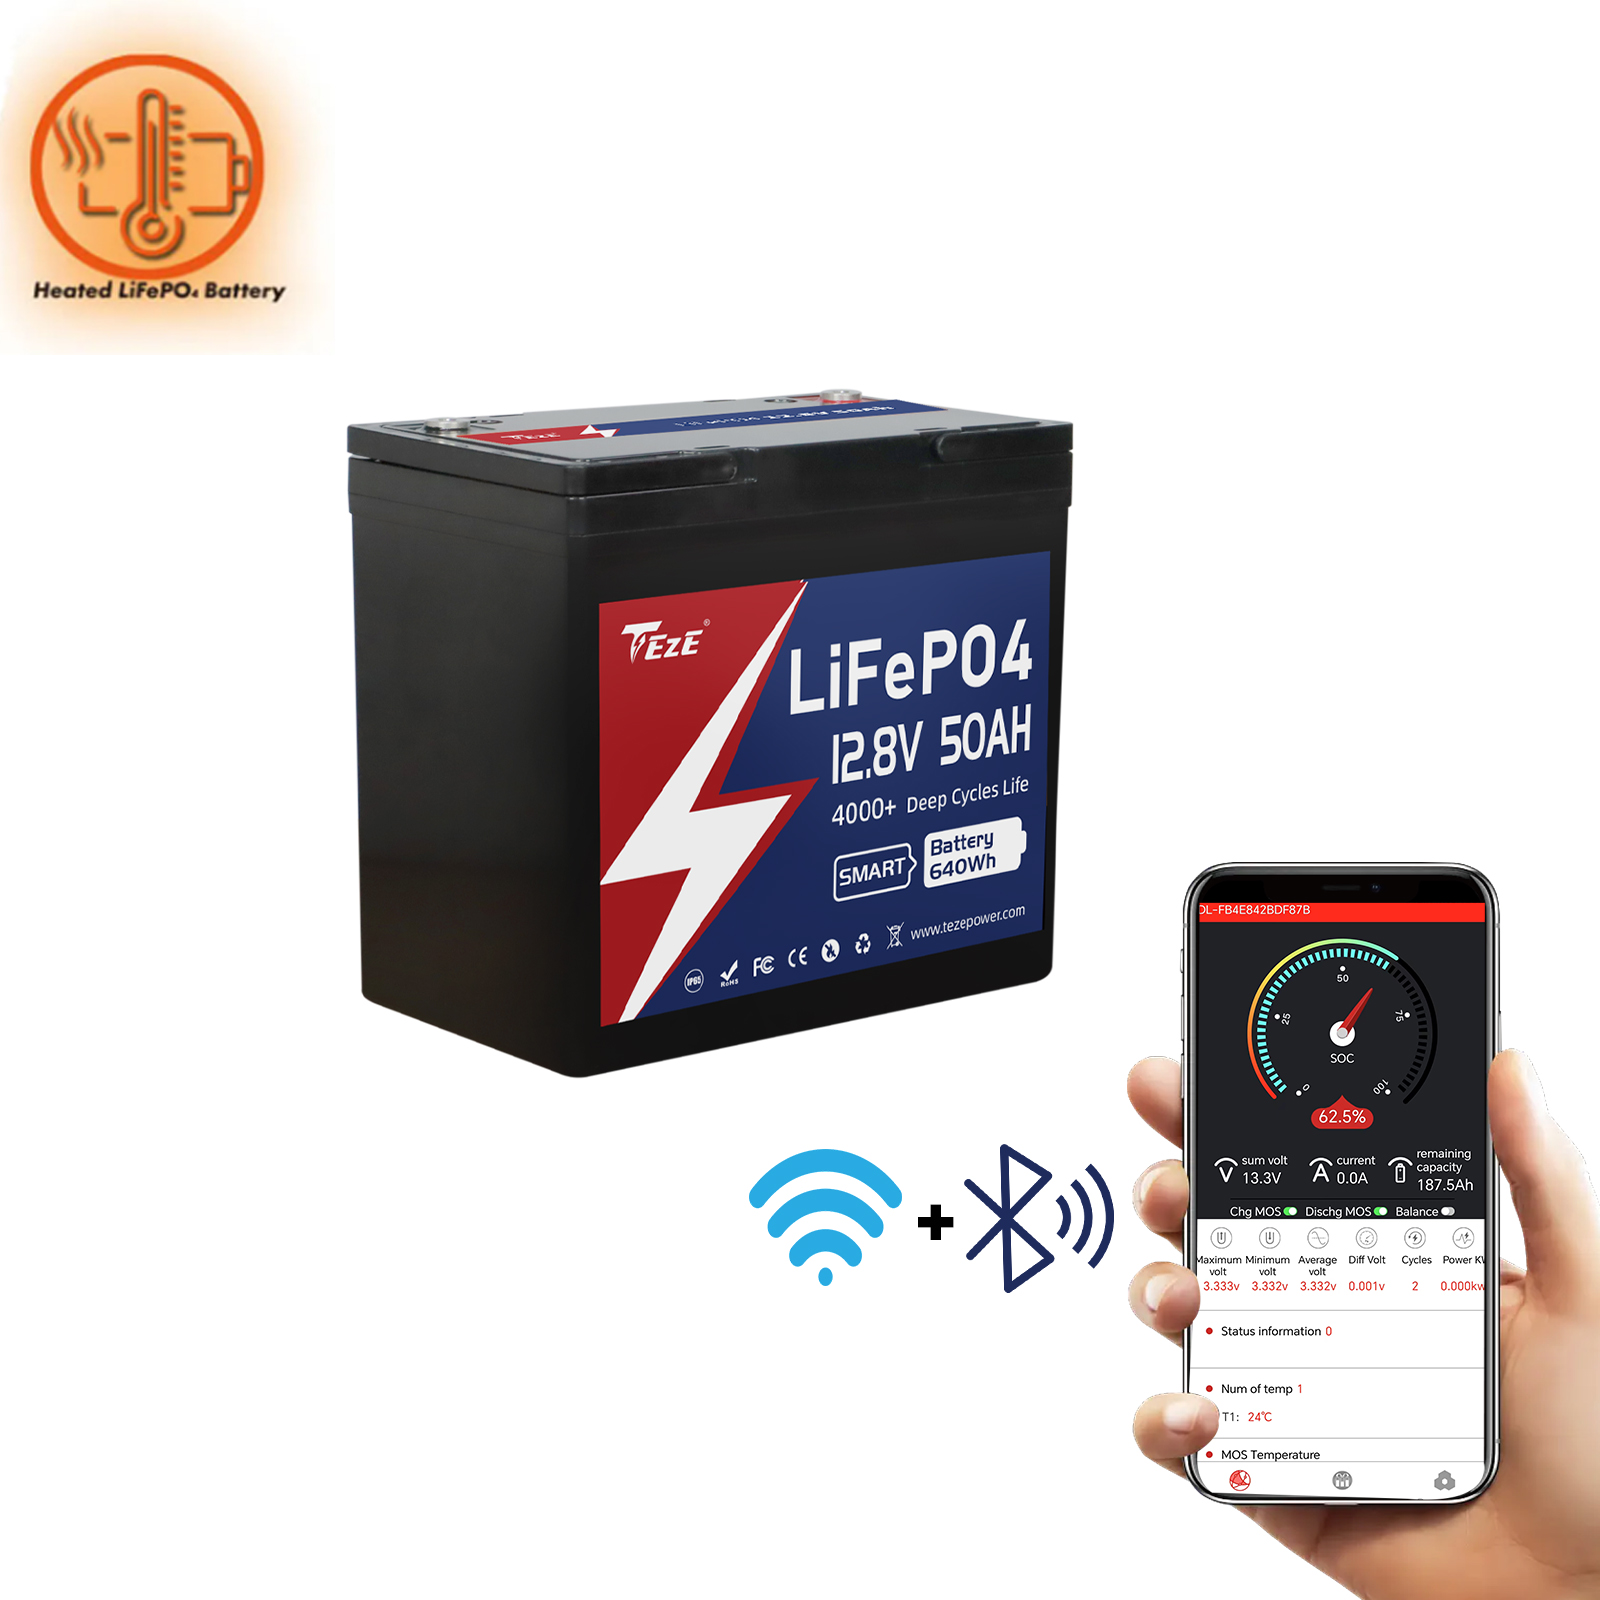 New Add WiFi-TezePower 12V 50Ah LiFePO4 Battery with WIFI and Bluetooth,  Self-heating and Active Balancer, Built-in 50A Daly BMS(WIFI Built-in